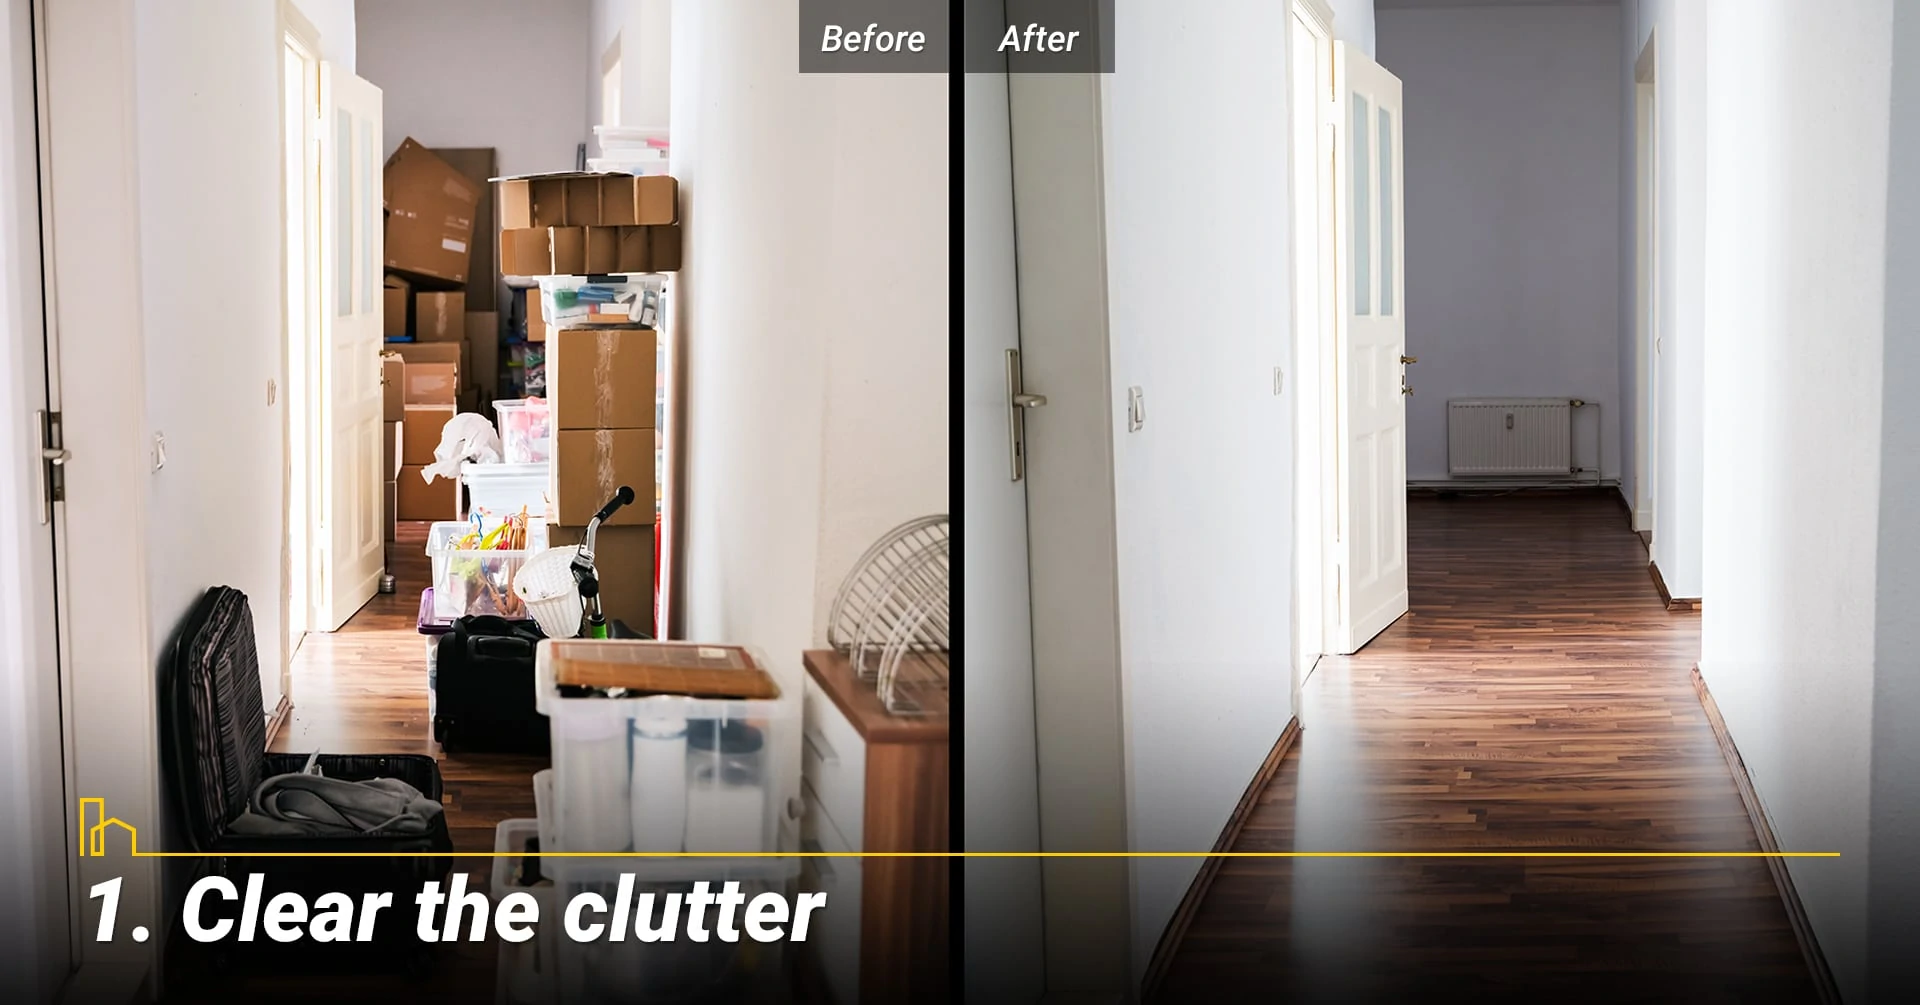 Clear the clutter